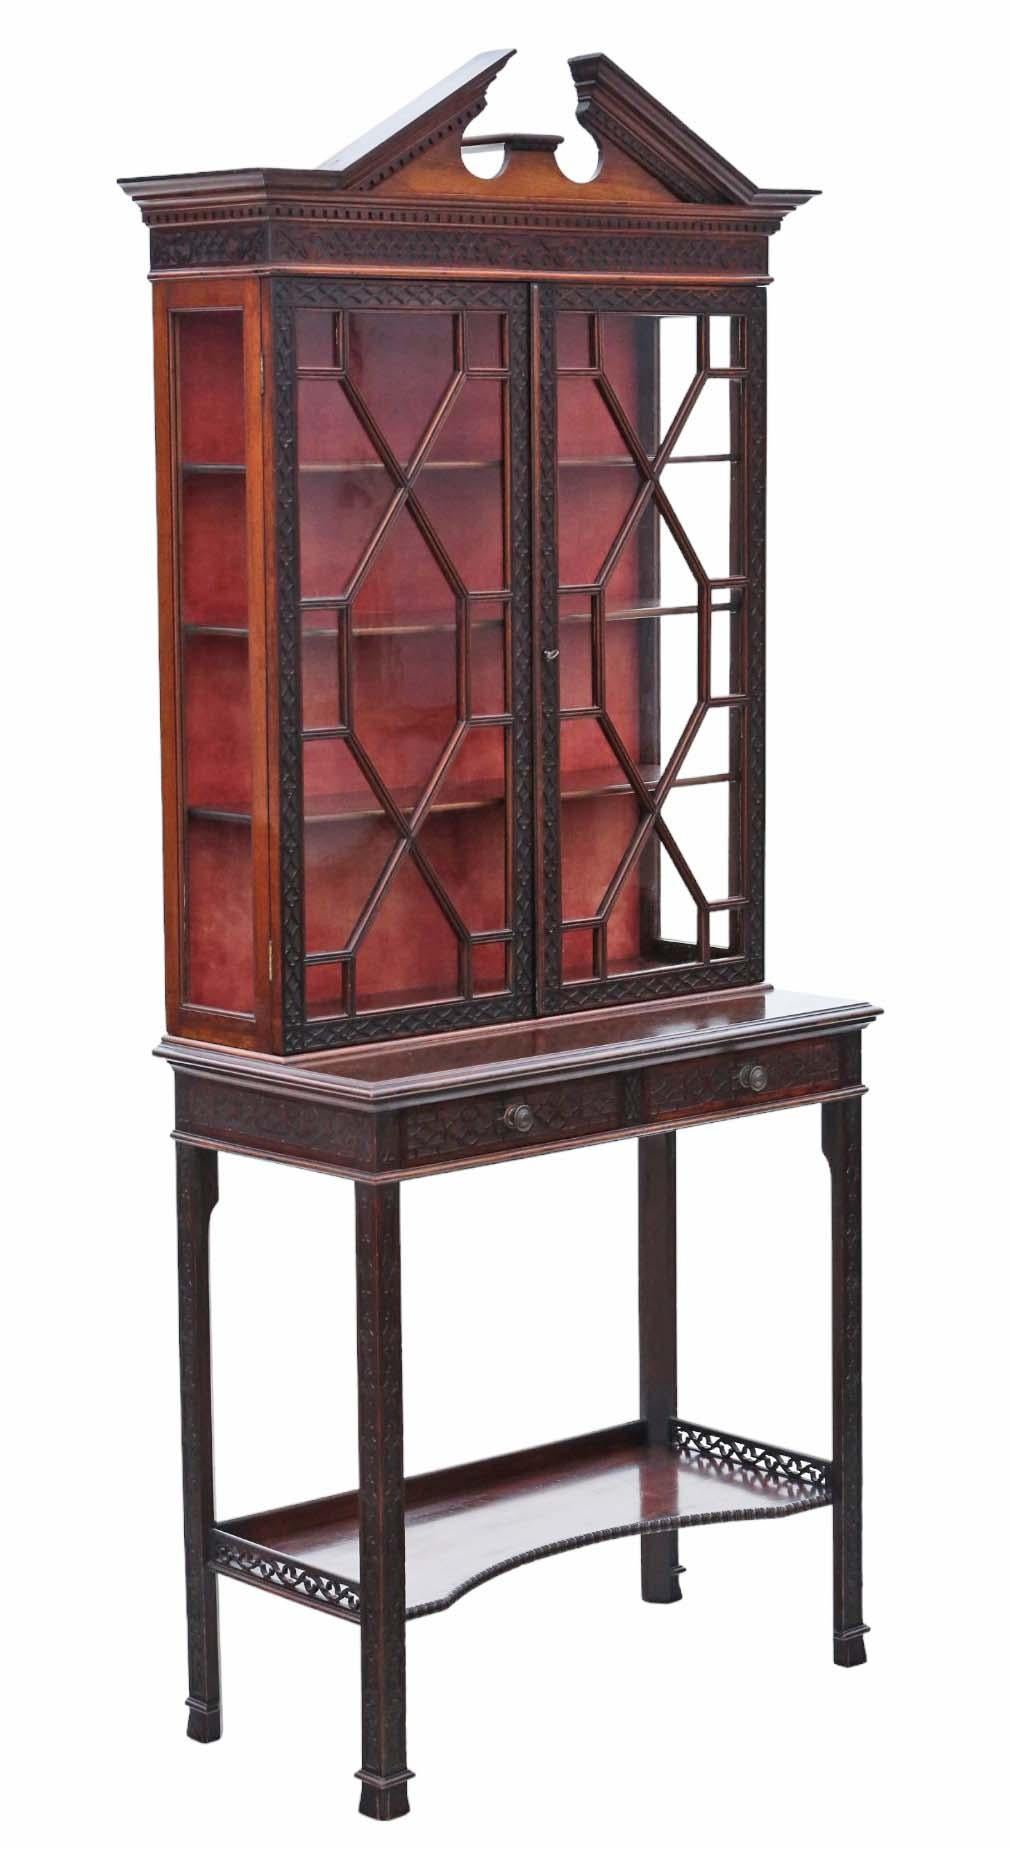 Introducing a distinguished 19th Century Antique Mahogany Pier Display Cabinet crafted by the esteemed maker Edwards & Roberts. This exceptional piece showcases intricate Chinoiserie blind fretcut decoration and features a split arch pediment,